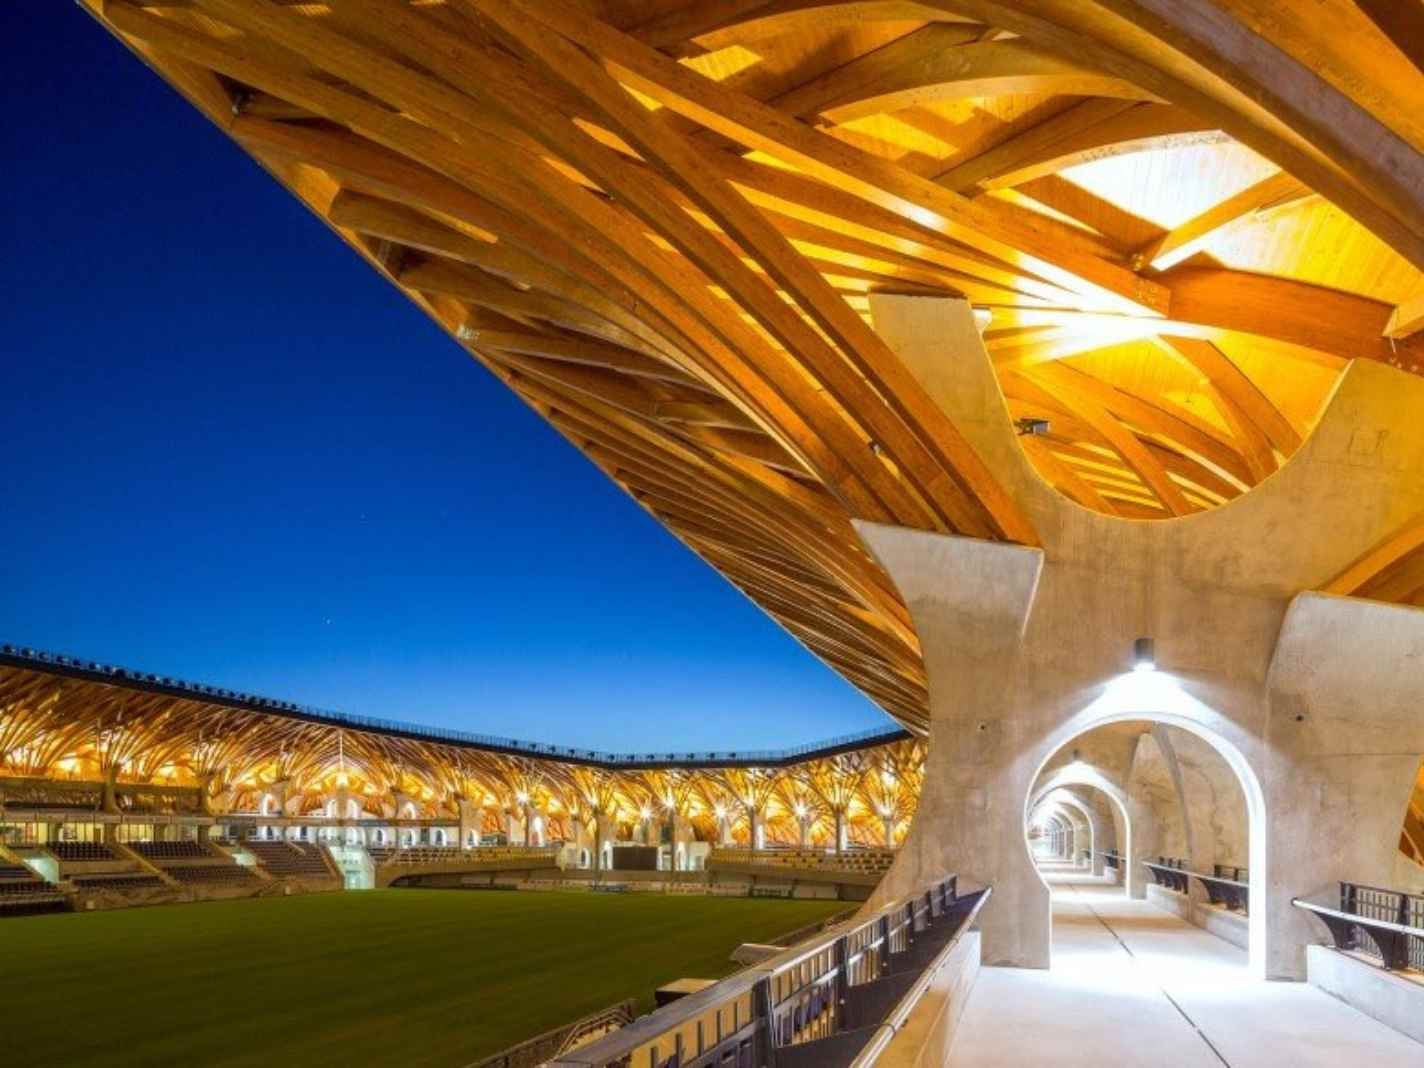 Pancho Arena: The beautiful football stadium that will trap you in its labyrinth